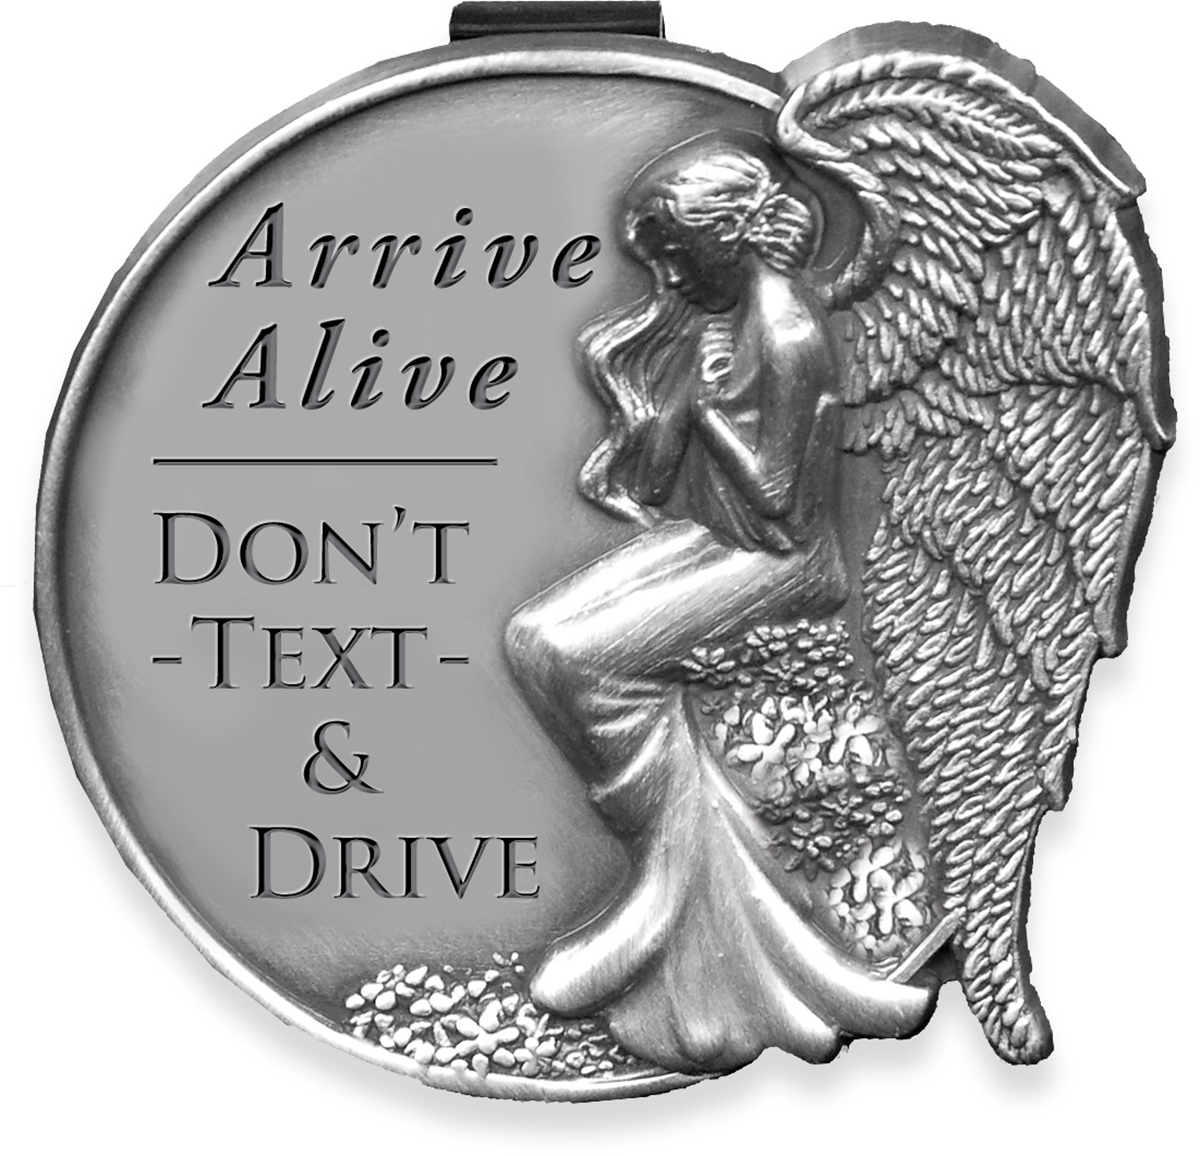 Arrive Alive Don't Text and Drive - Visor Clip